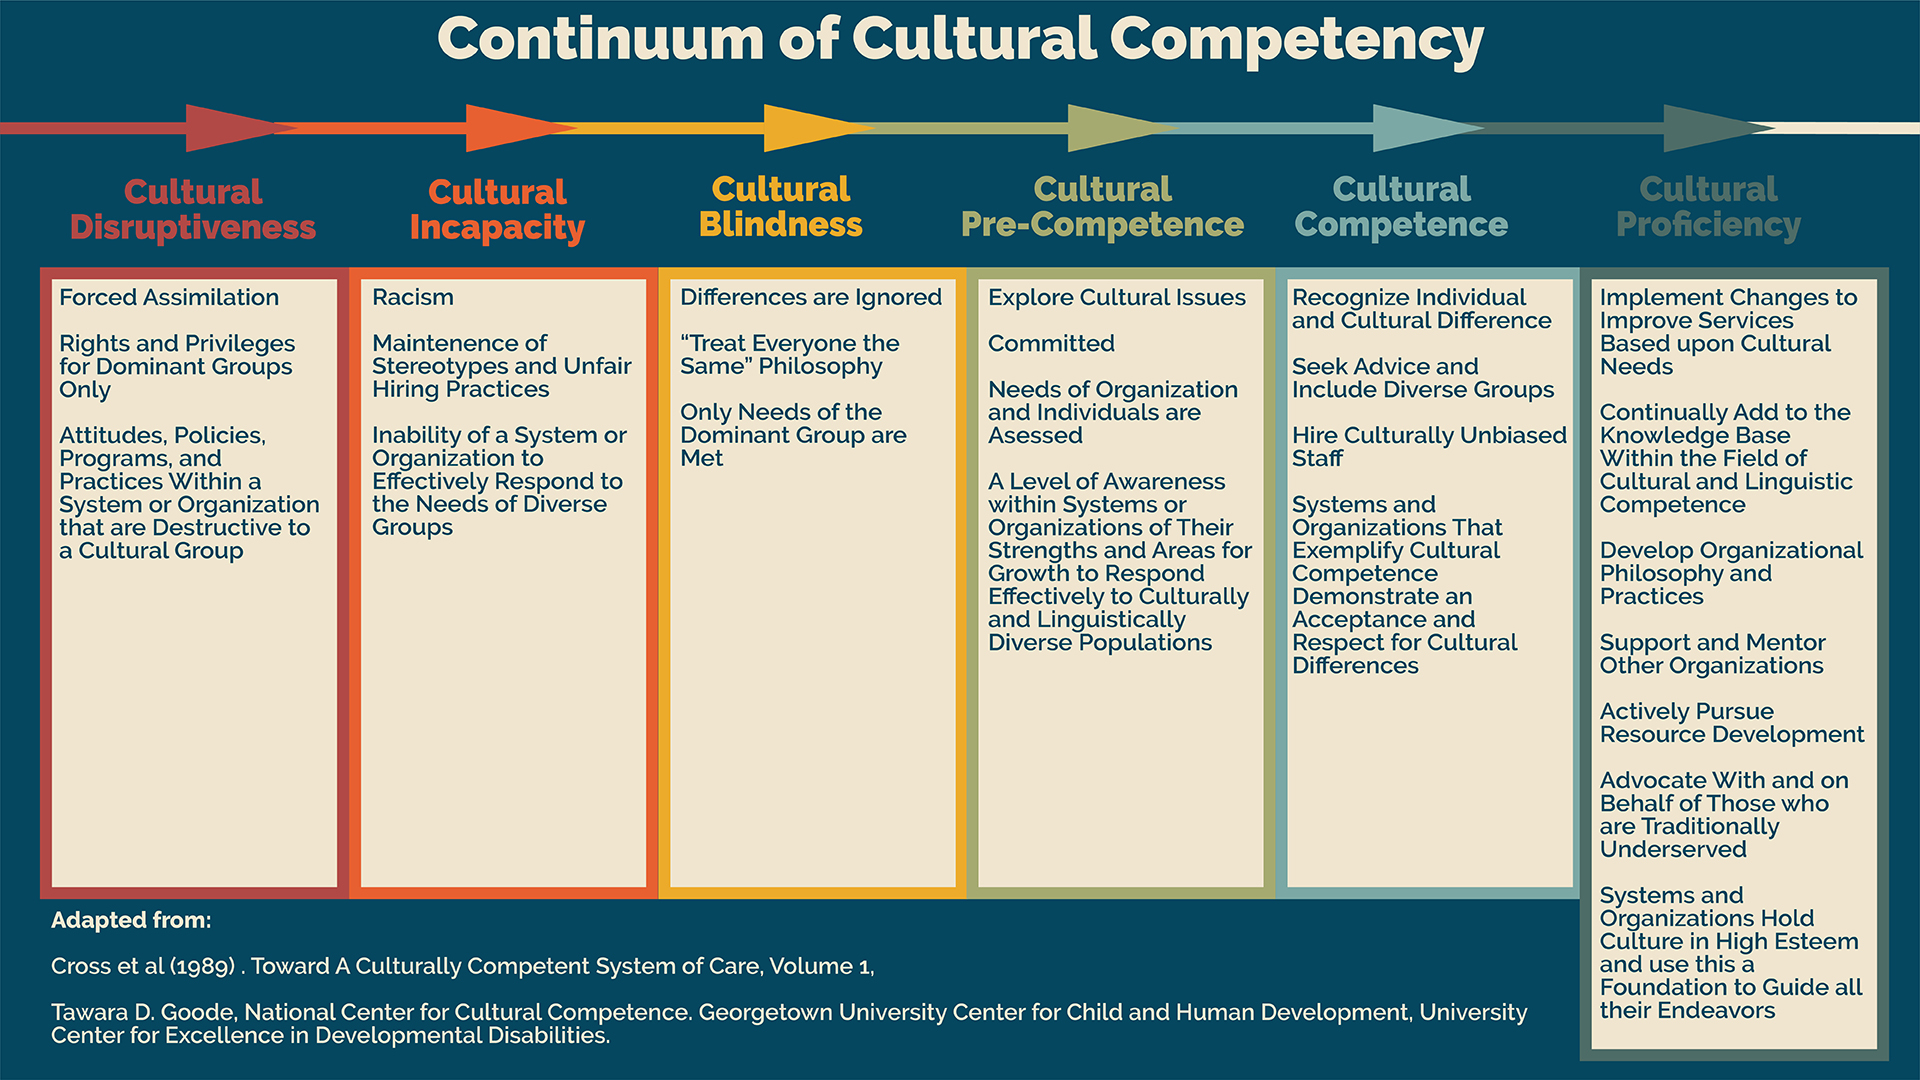 Continuum of Cultural Competency chart.